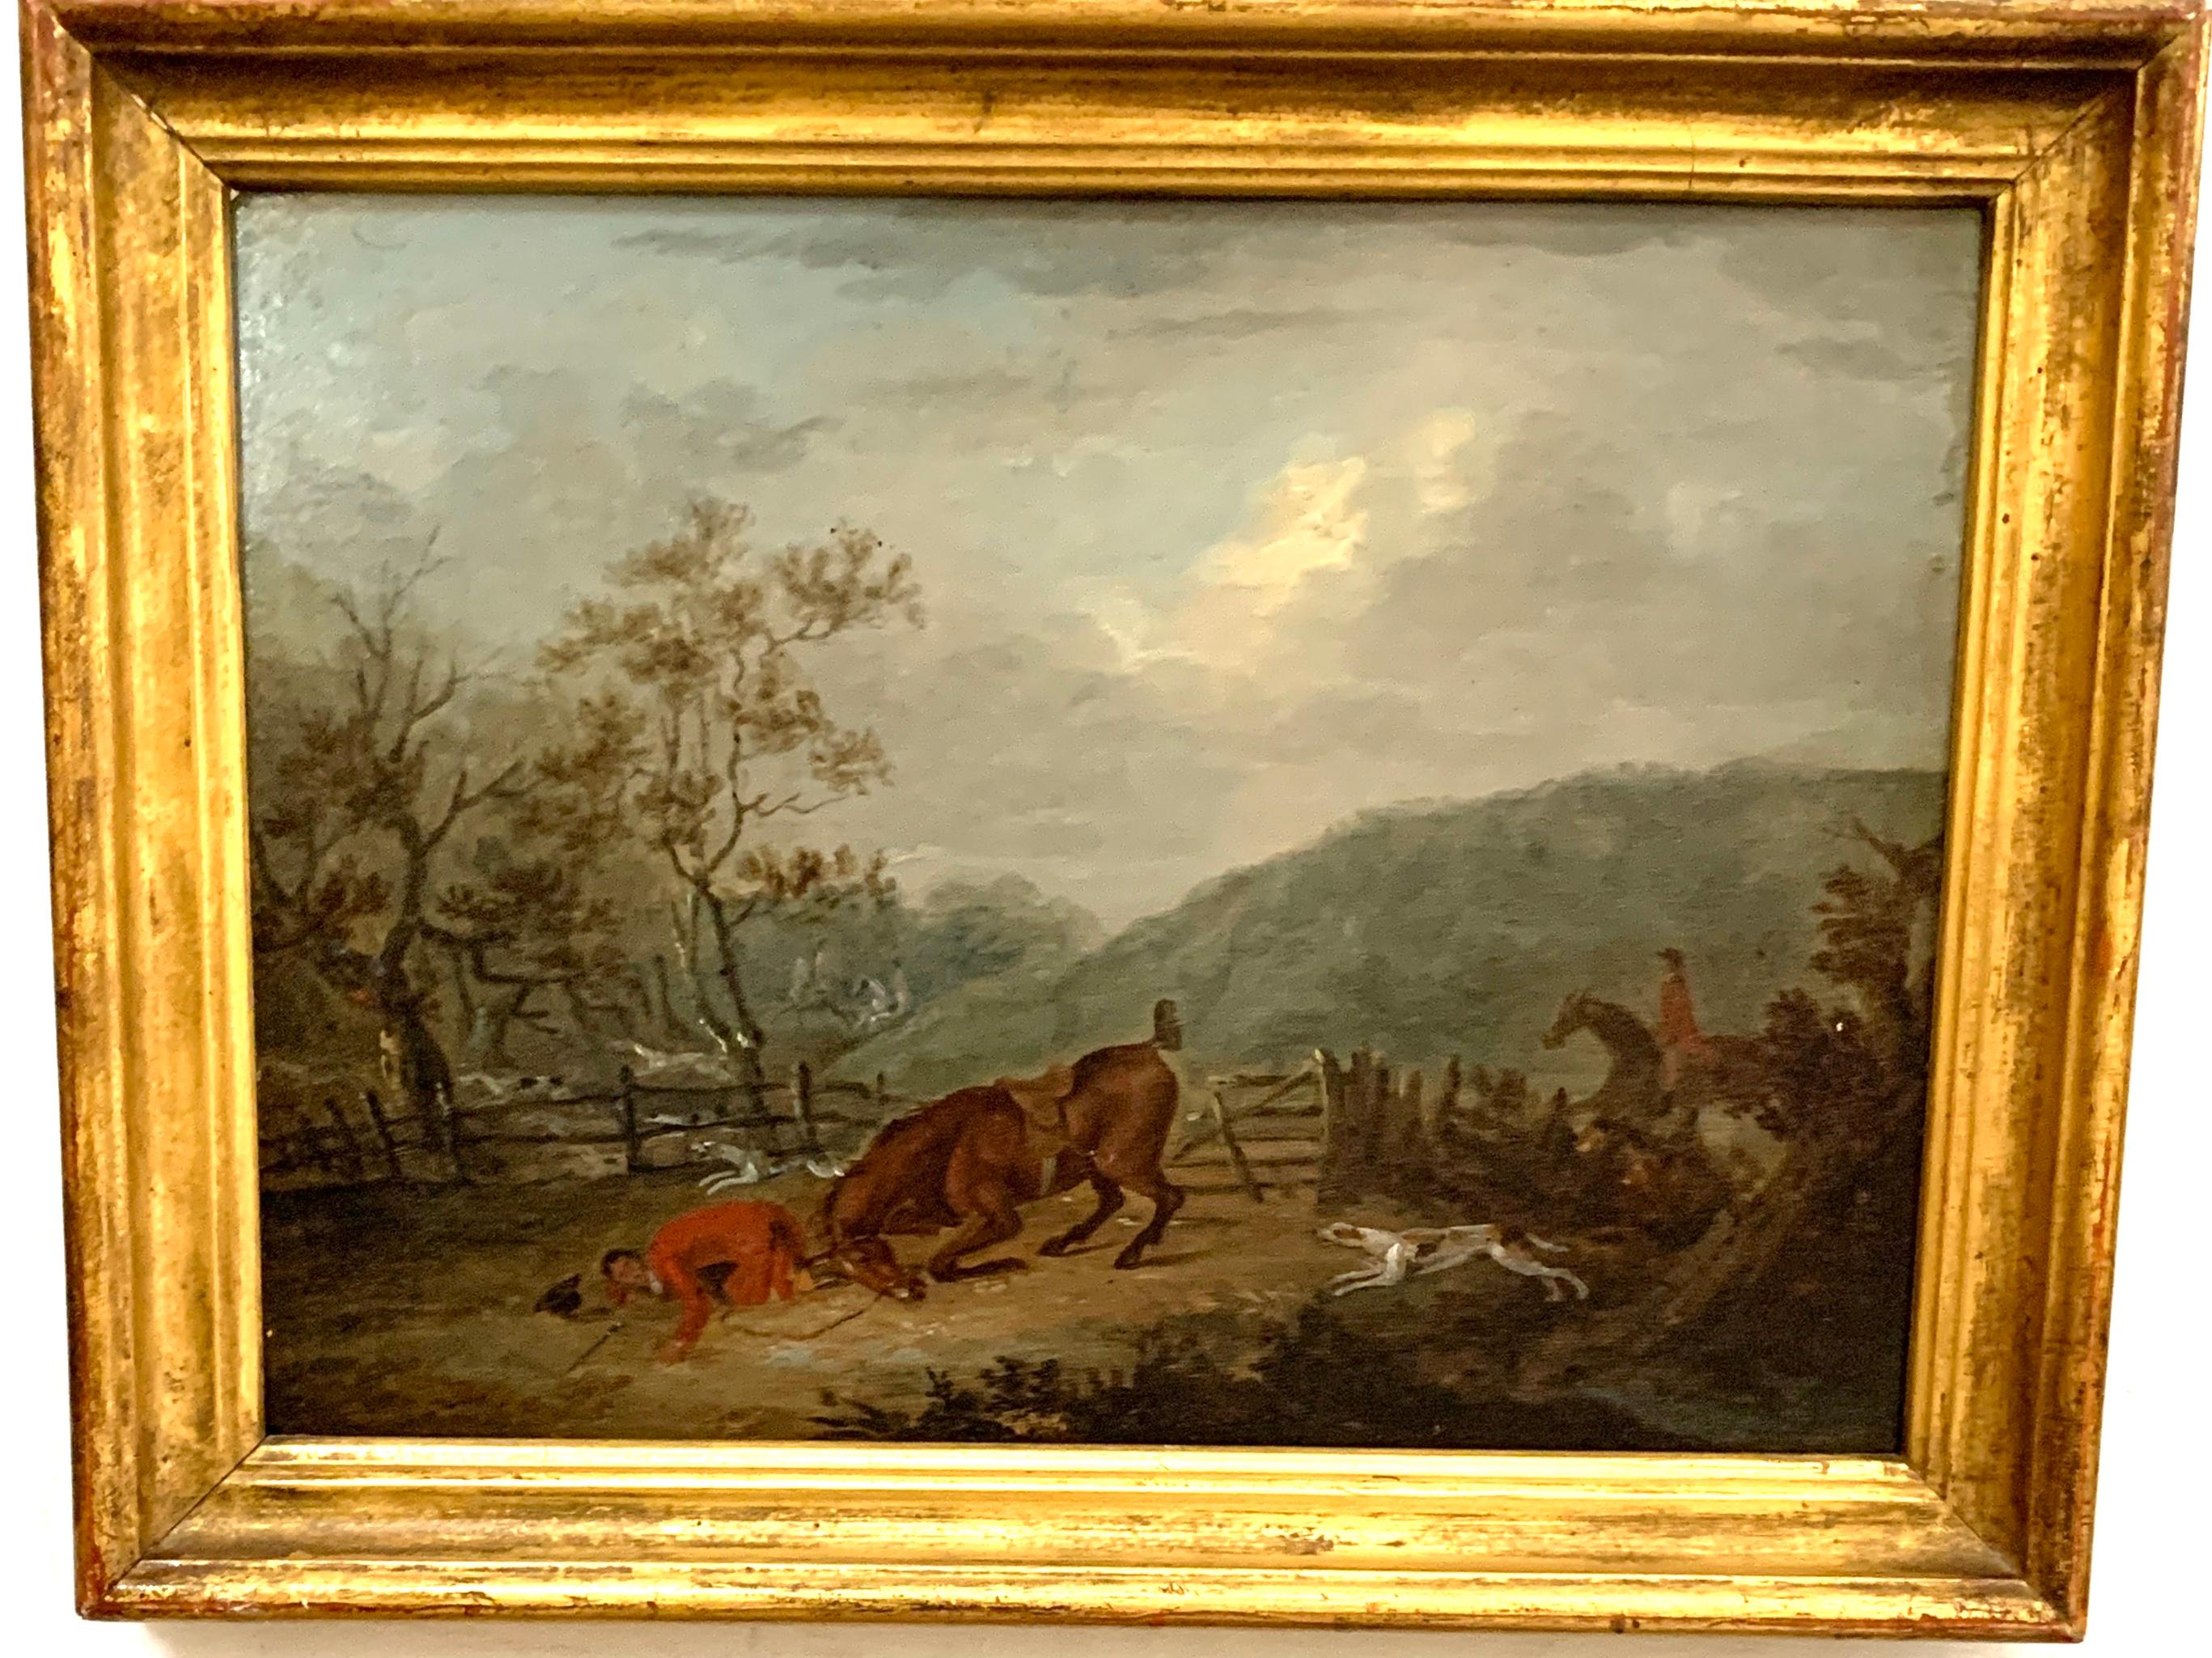 Set of 4 early 19th century Fox hunting landscape with men in red upon horseback - Brown Animal Painting by John Nost Sartorius